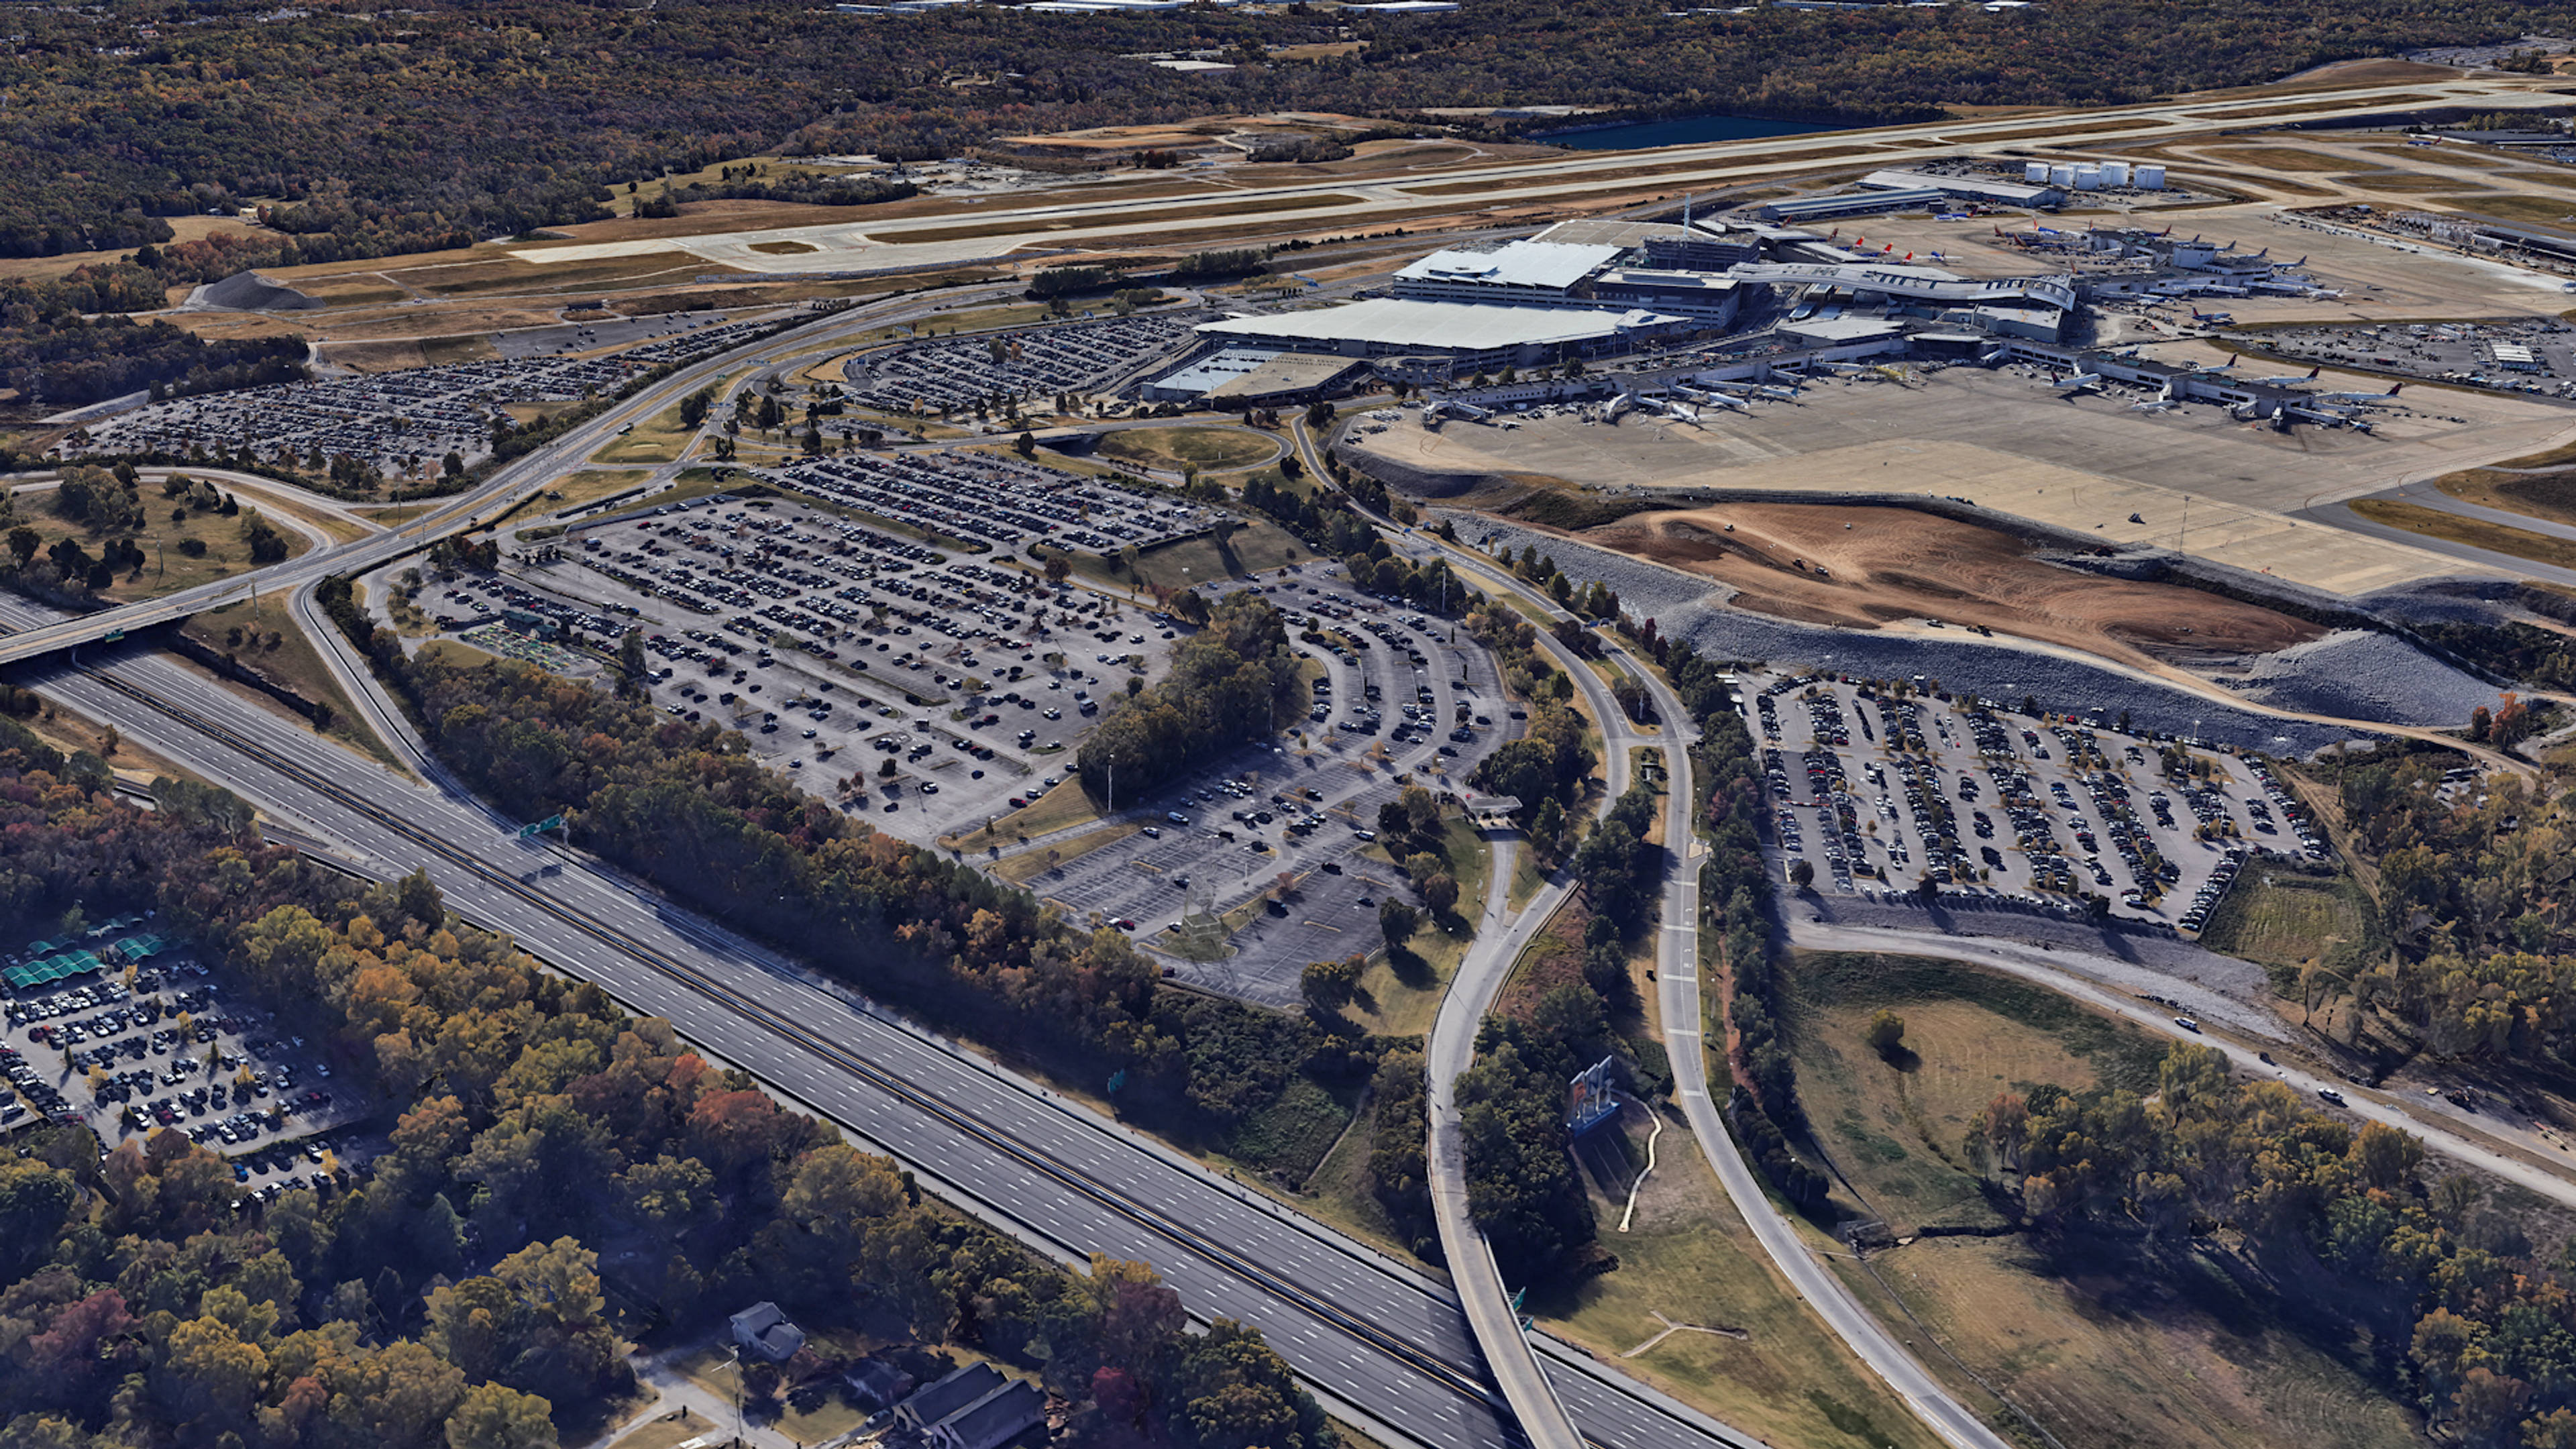  Aerial View of Nashville Airport Parking